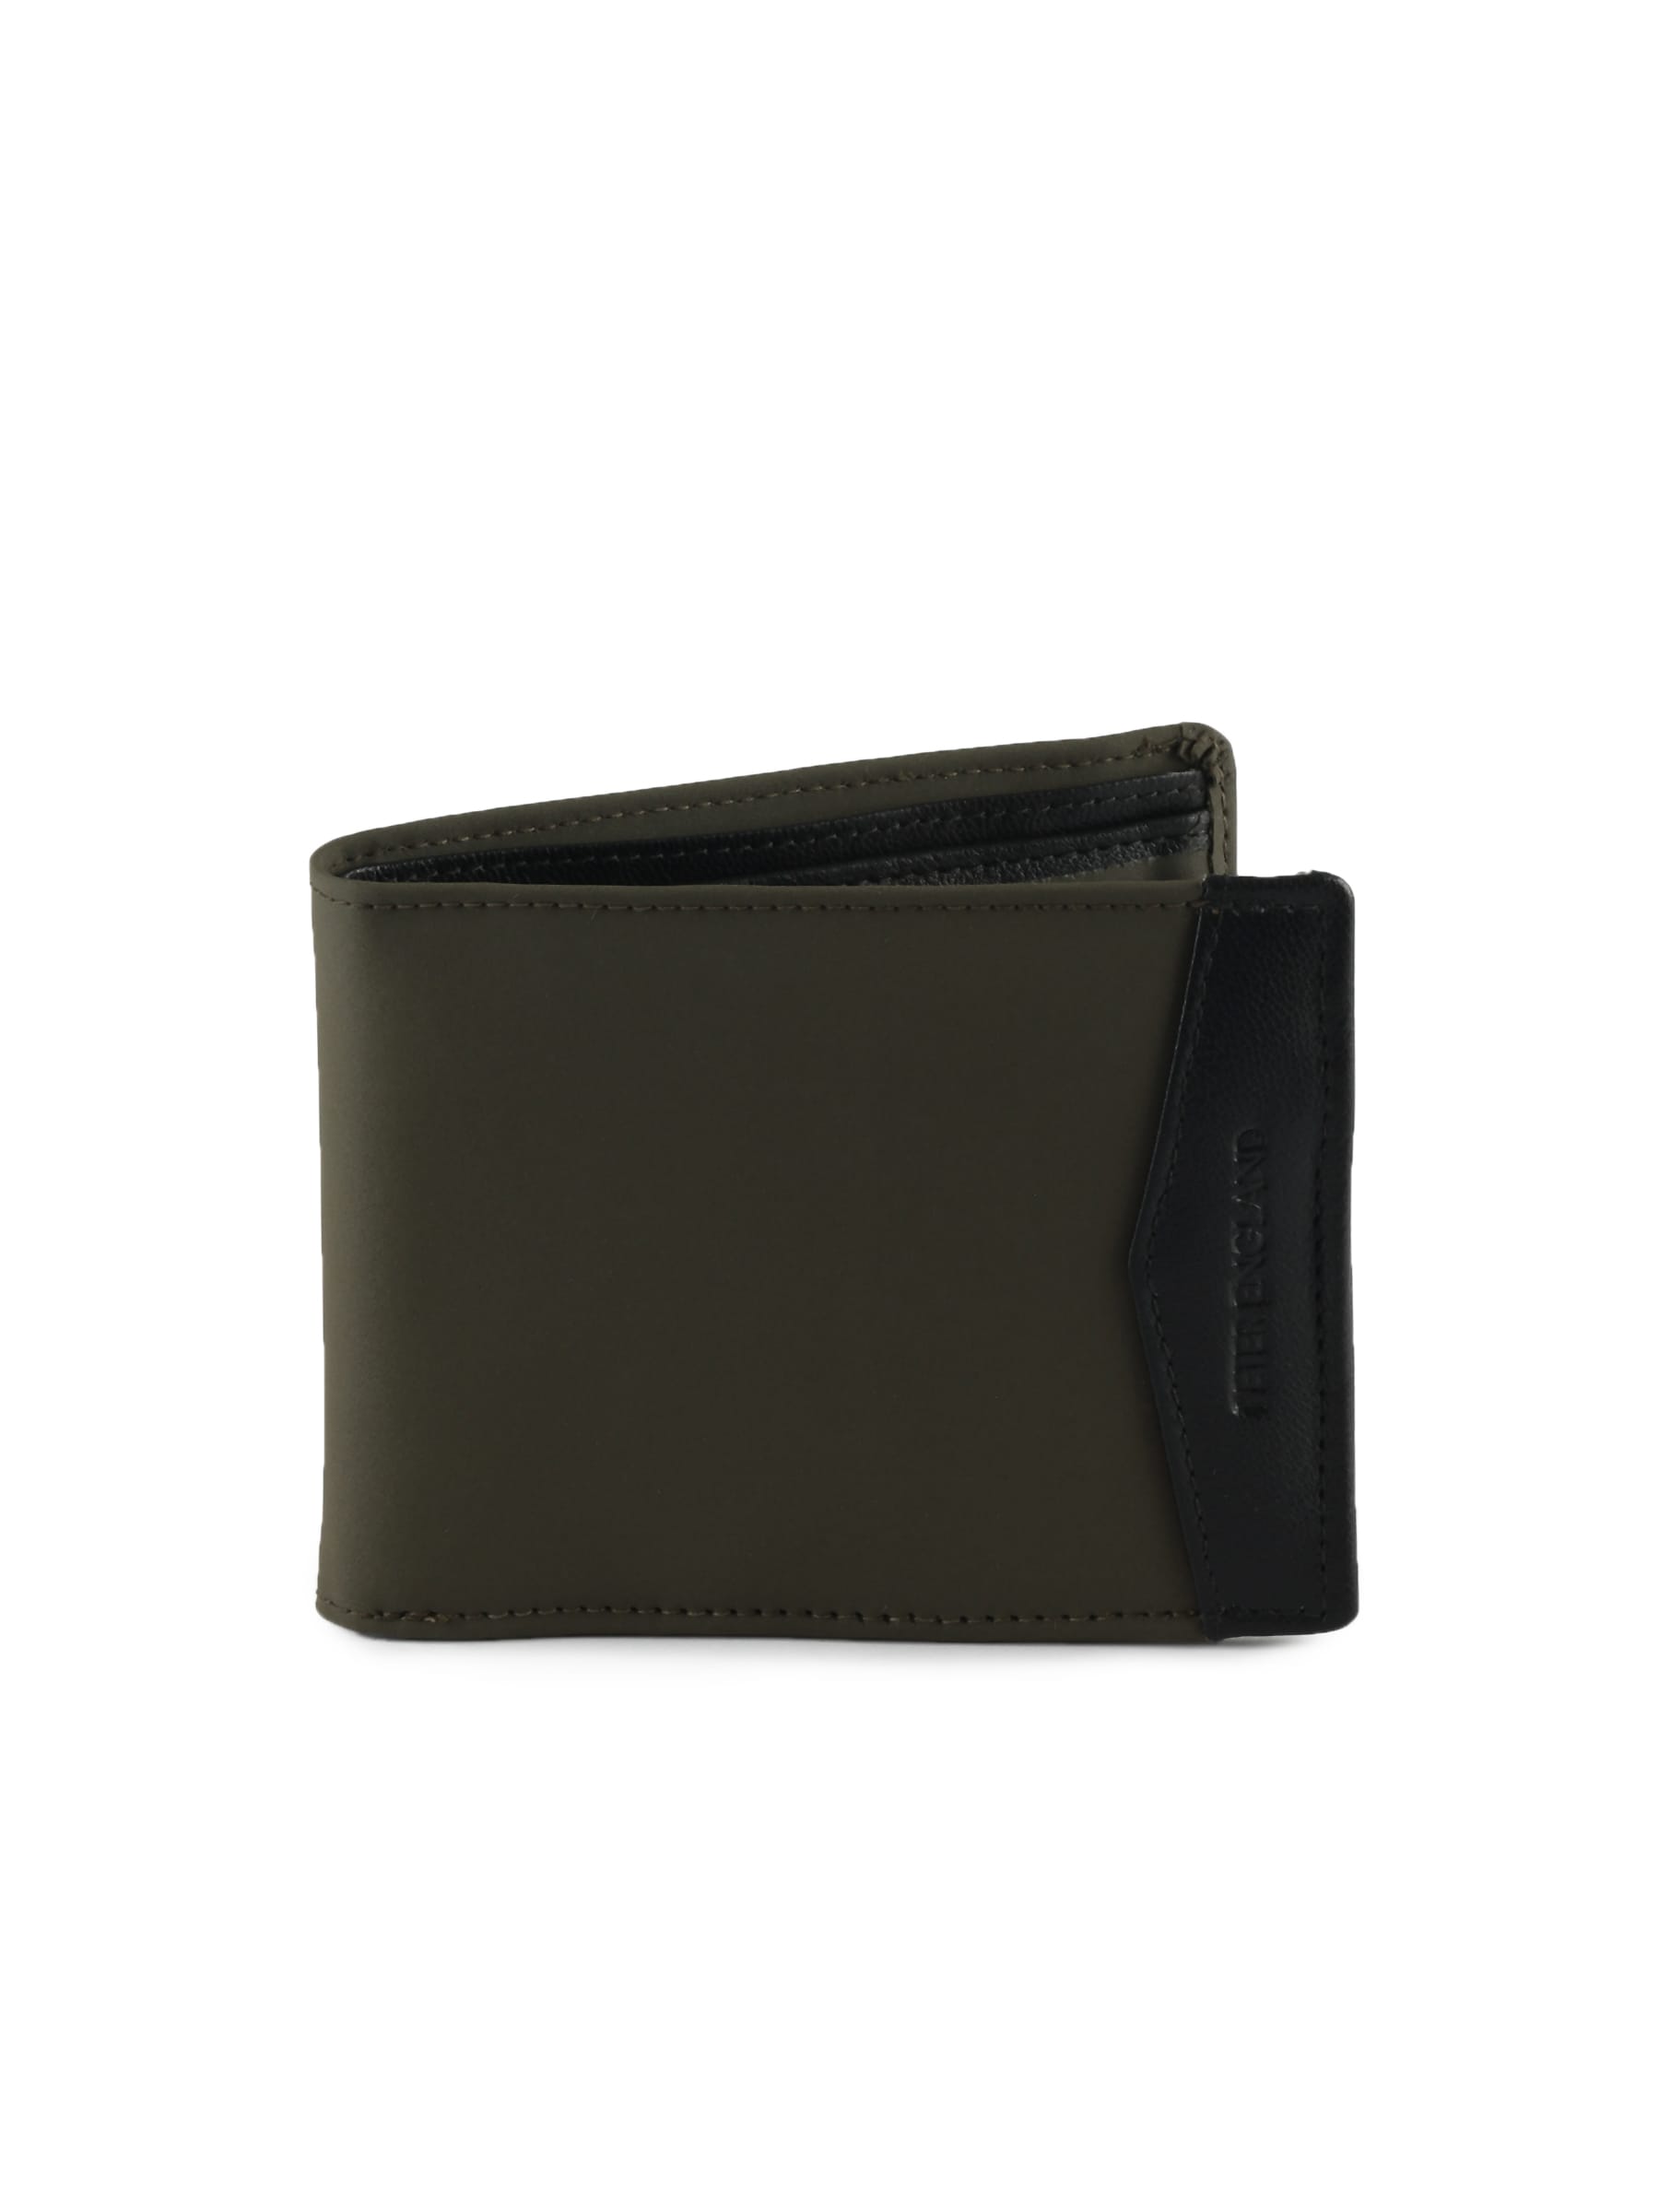 Peter England Unisex Casual Olive Wallet